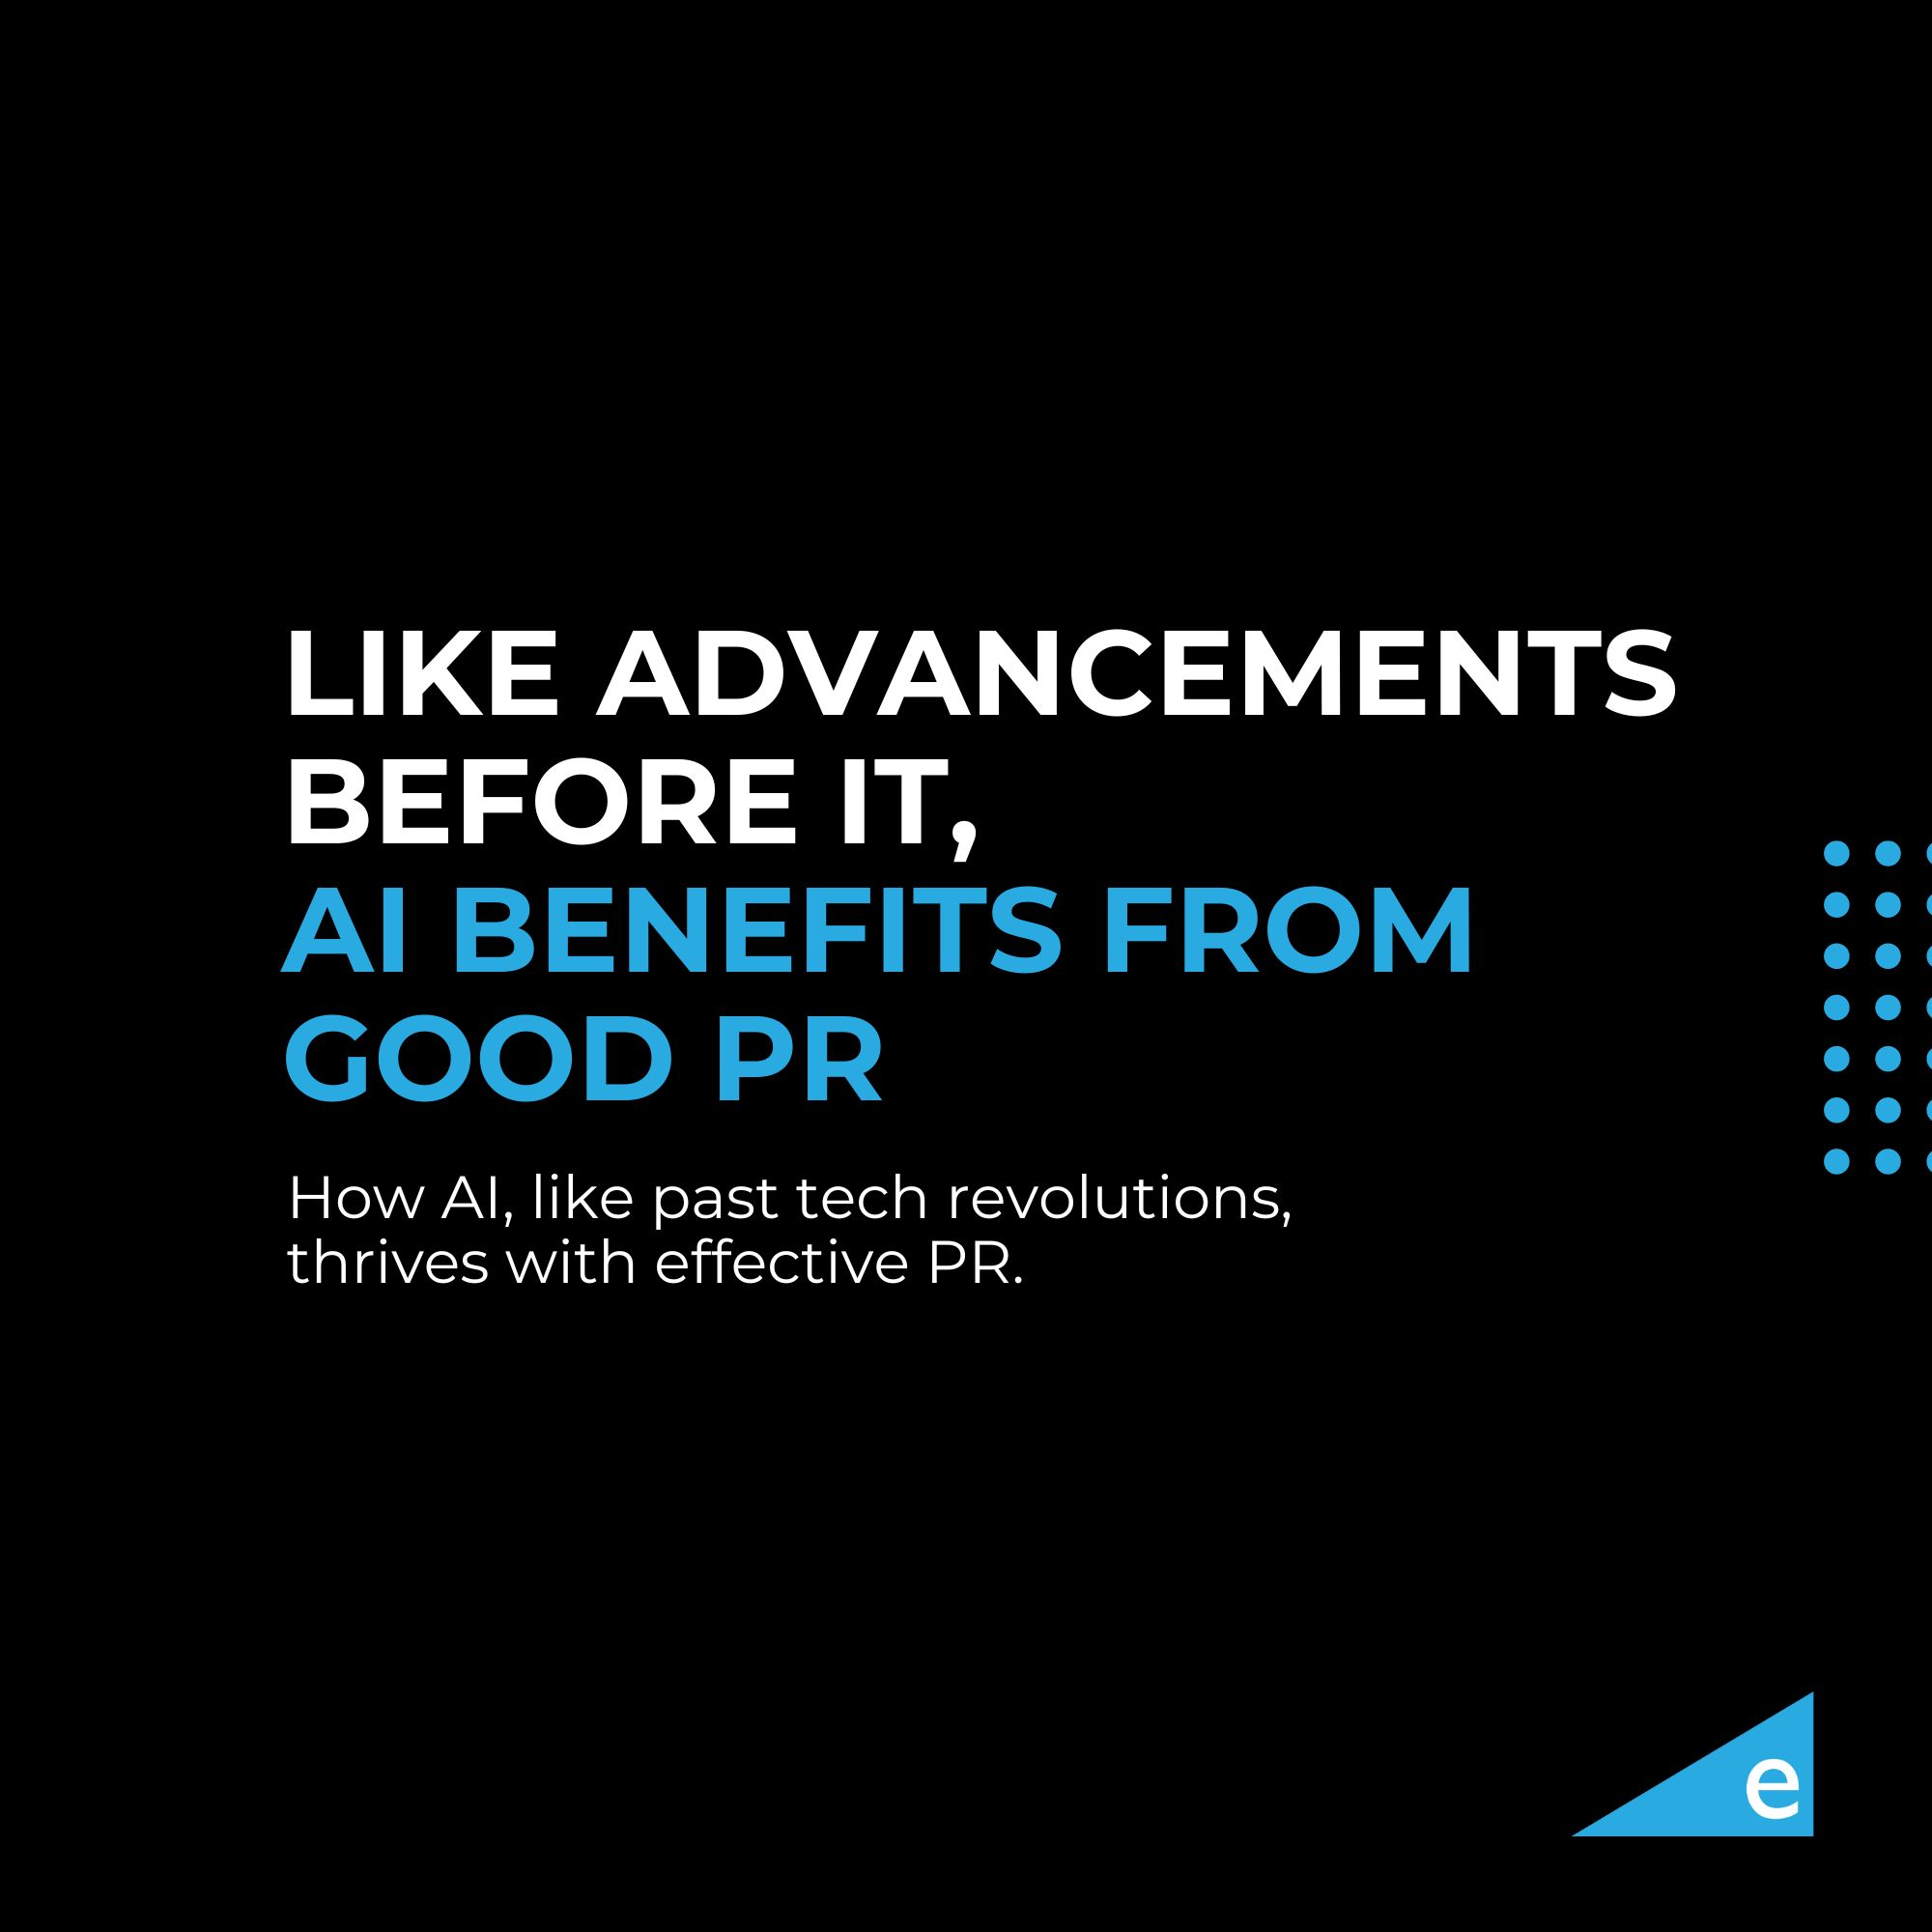 Like Advancements before it, AI benefits from Good PR